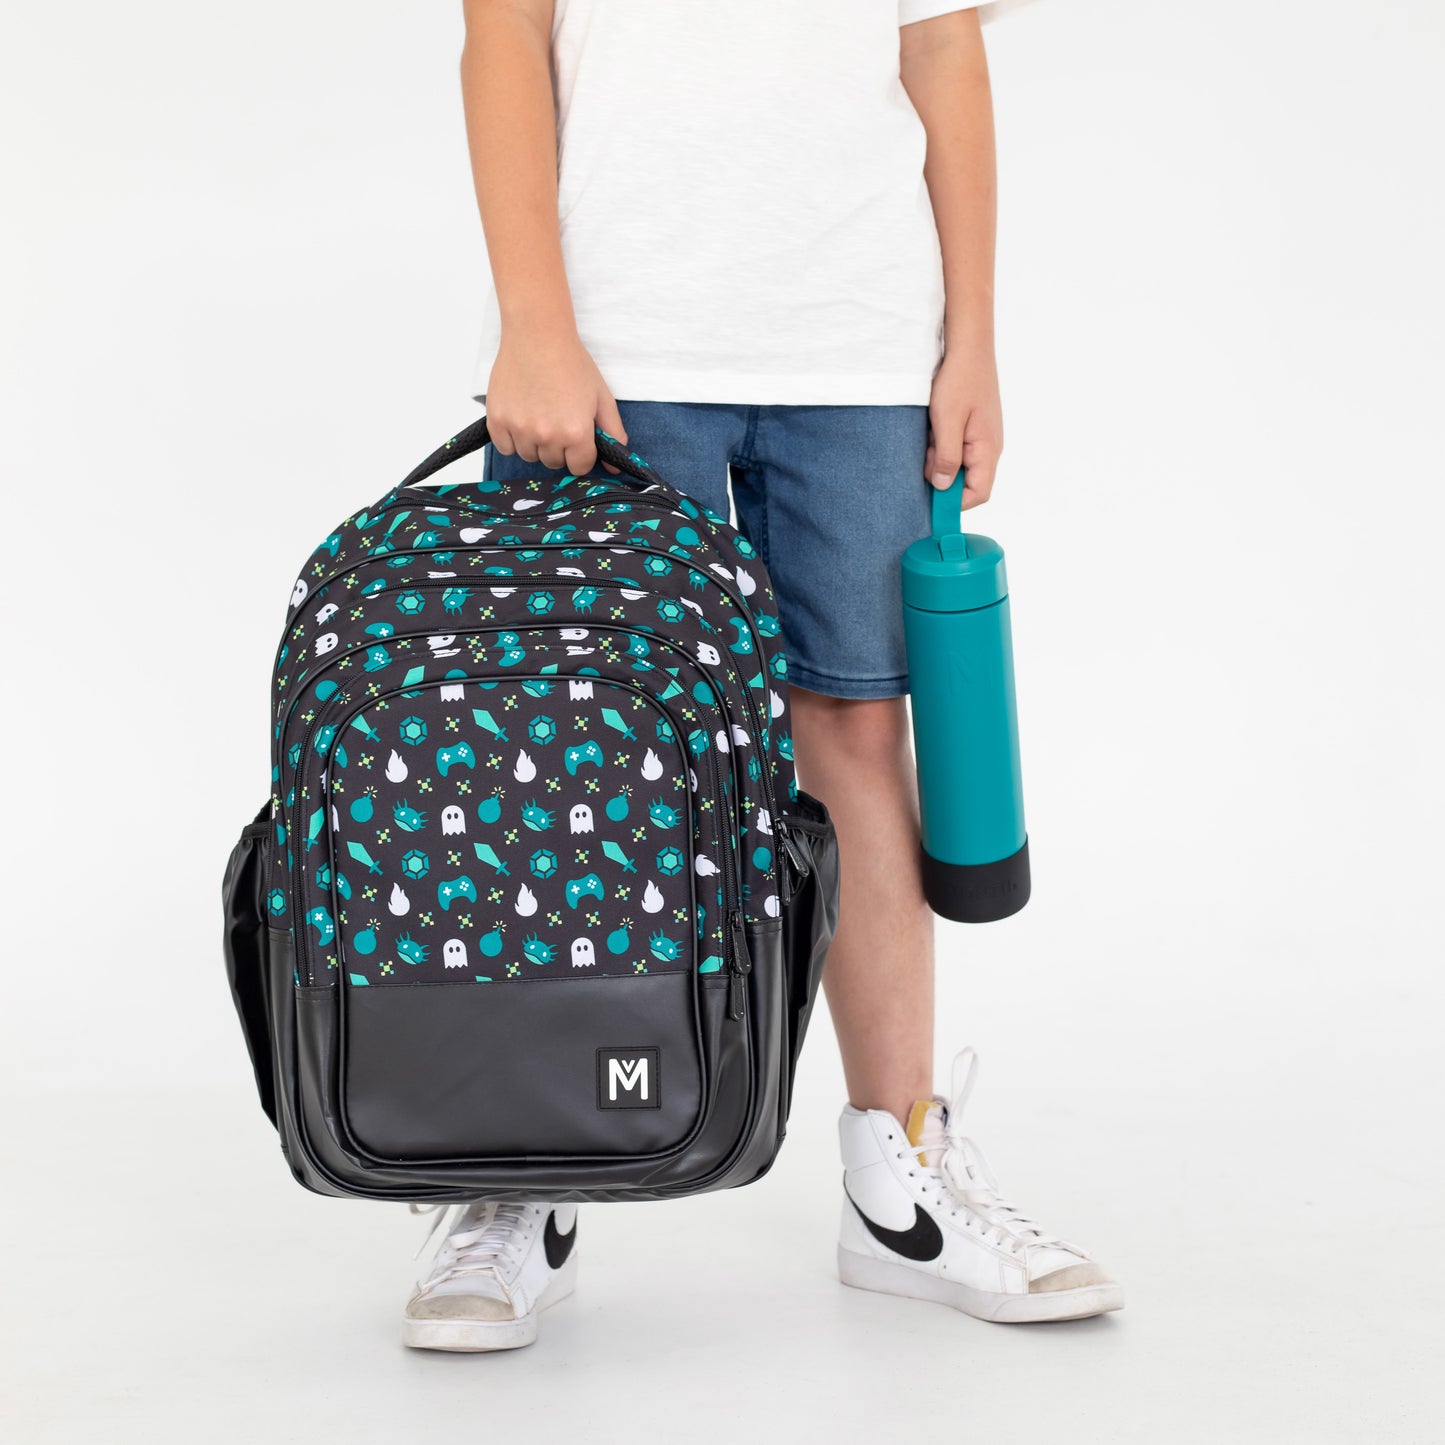 MontiiCo School Bag Package - Game On